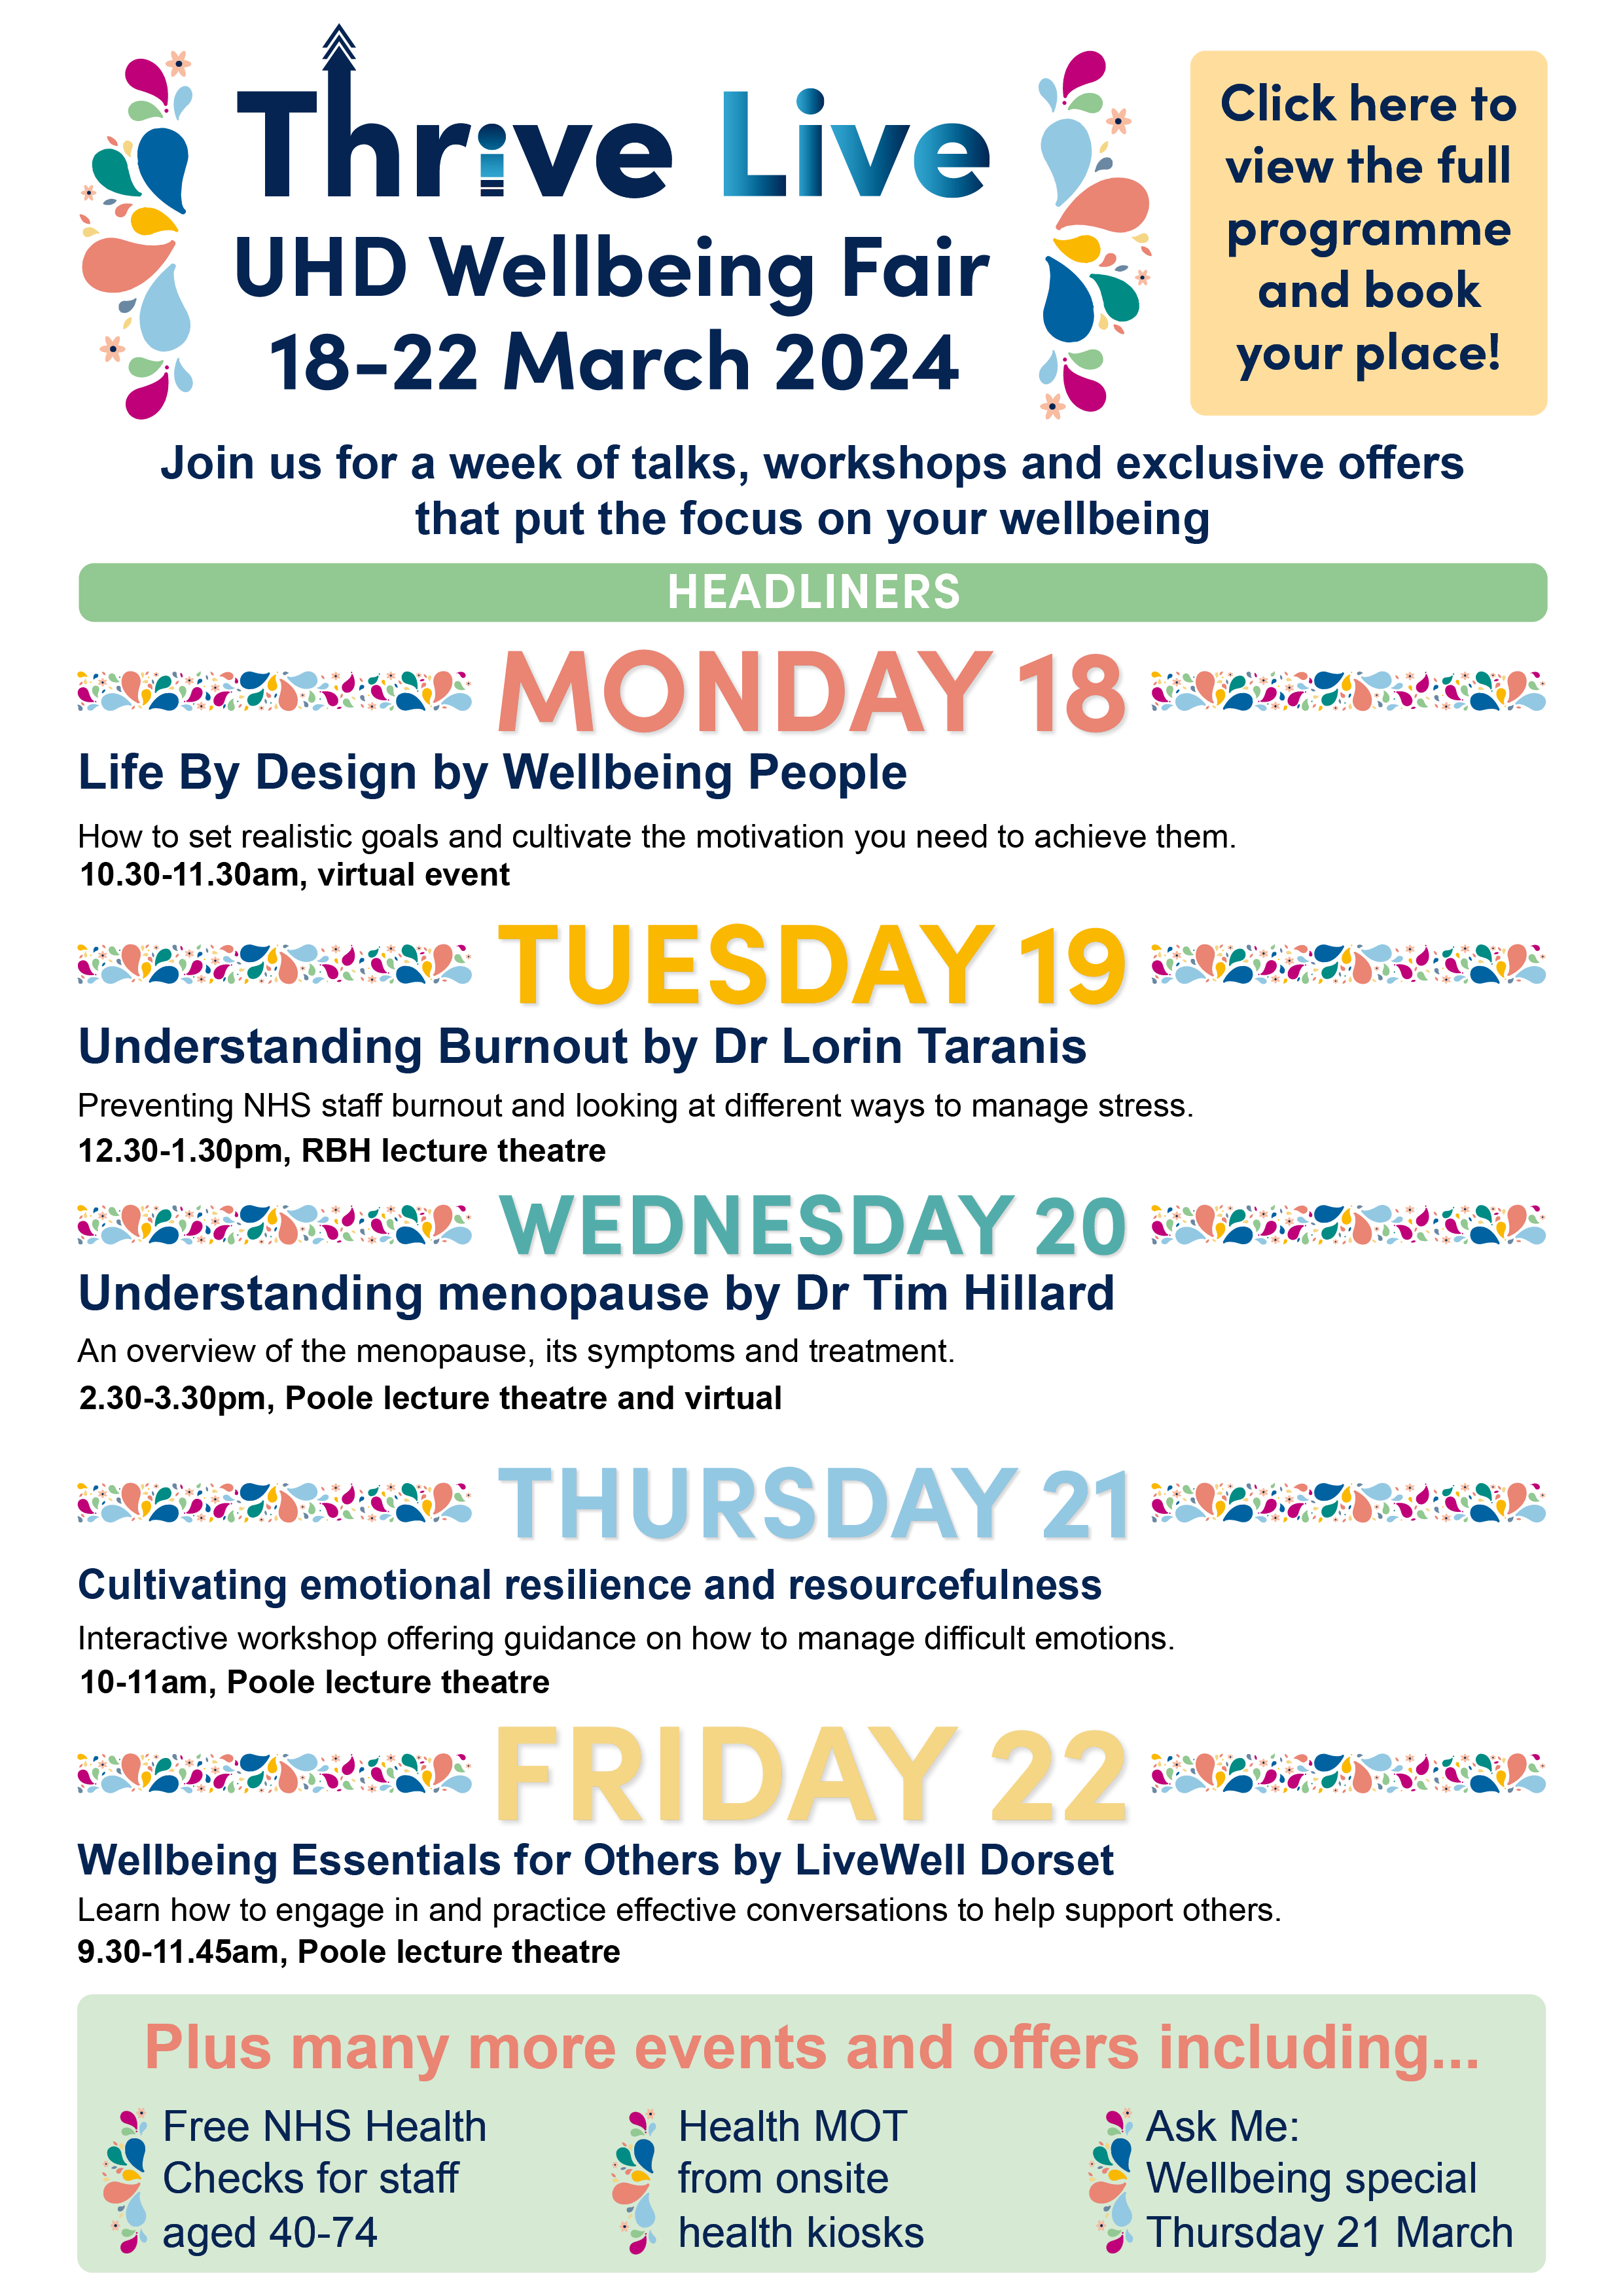 Click to see the full programme of events